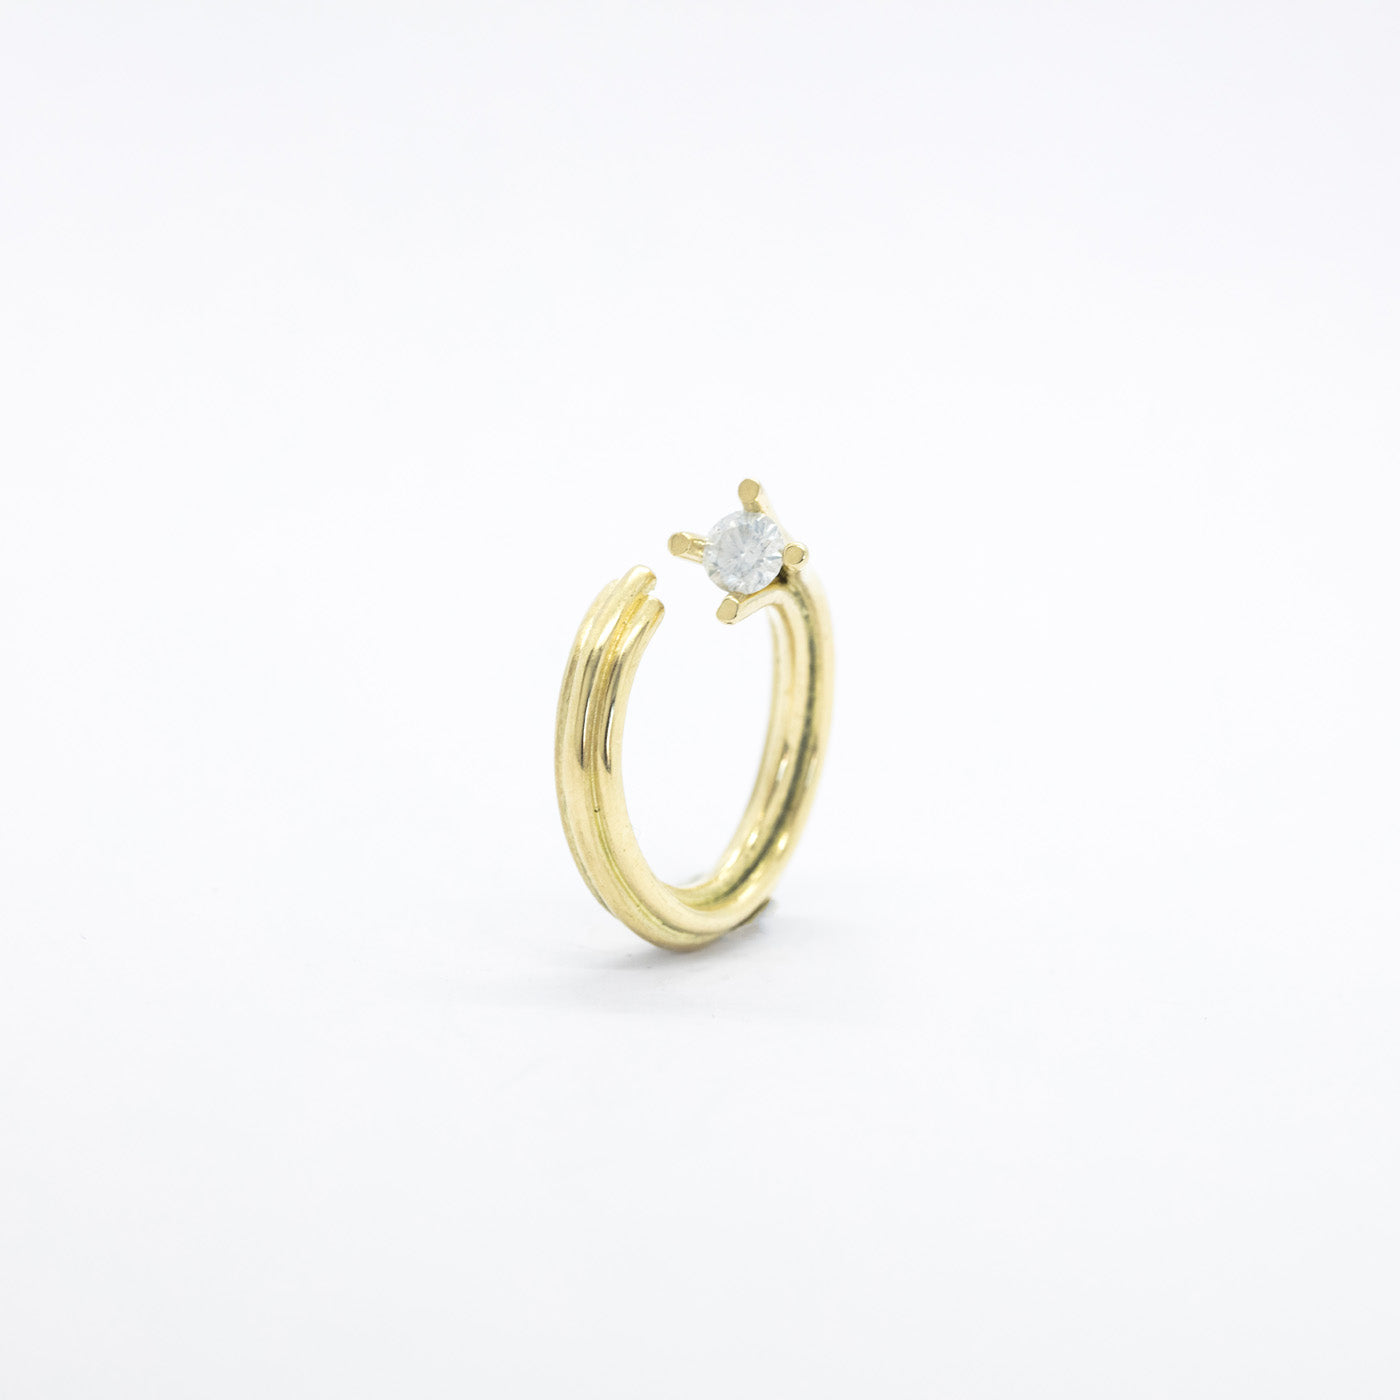 Ring Vortex 18ct yelow gold 0.43ct opalescent white diamond front product view innan jewellery independent atelier berlin